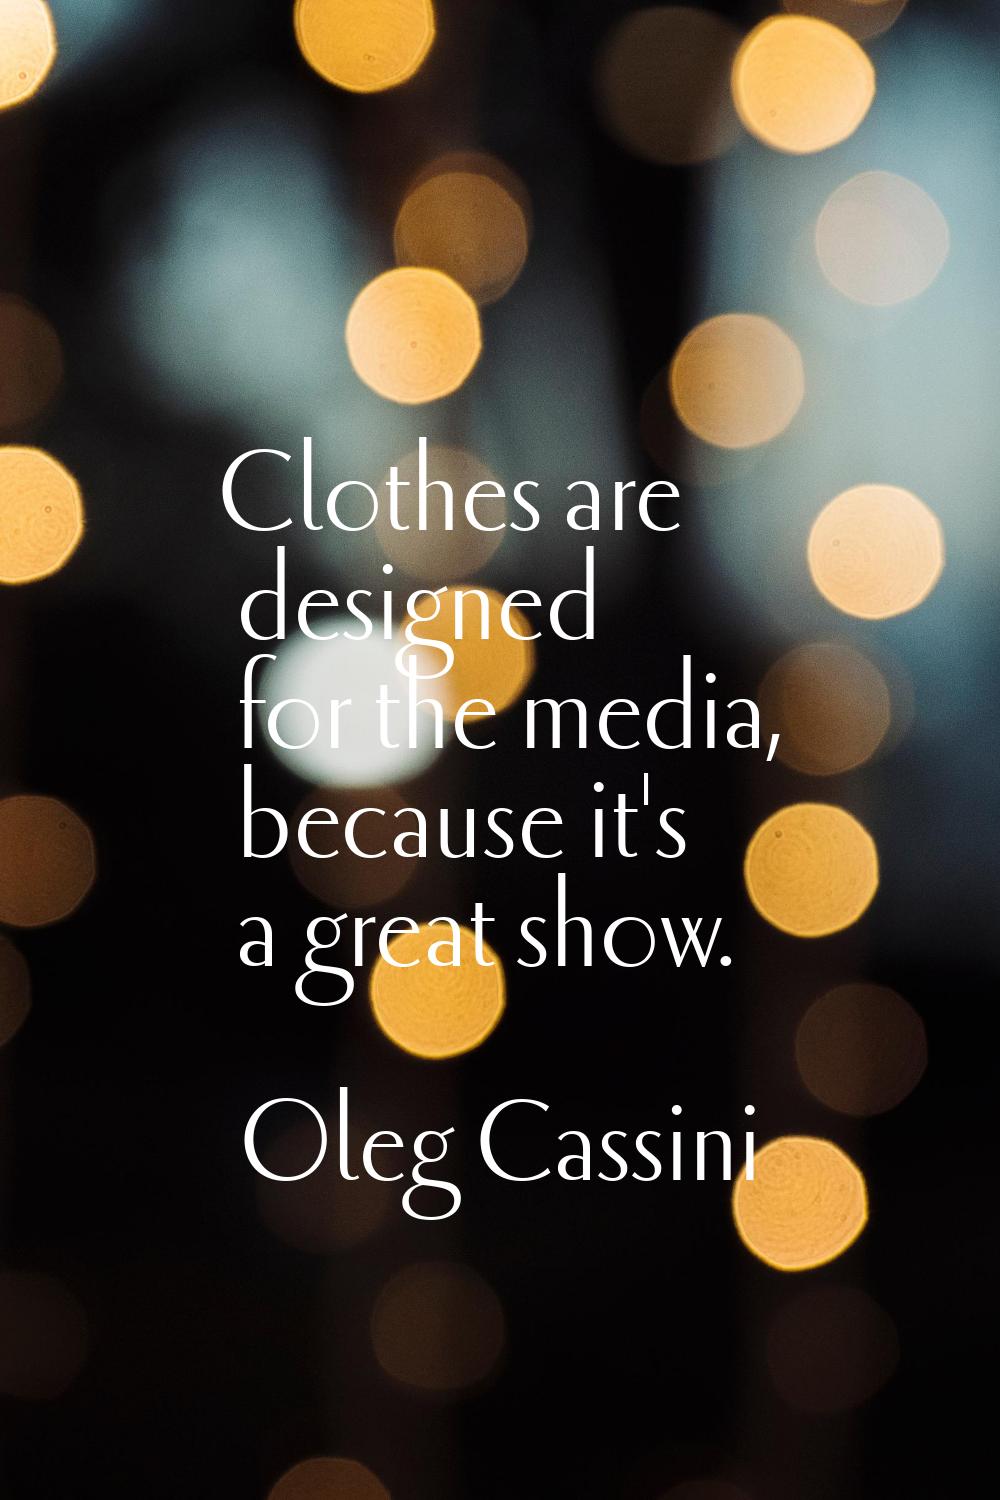 Clothes are designed for the media, because it's a great show.